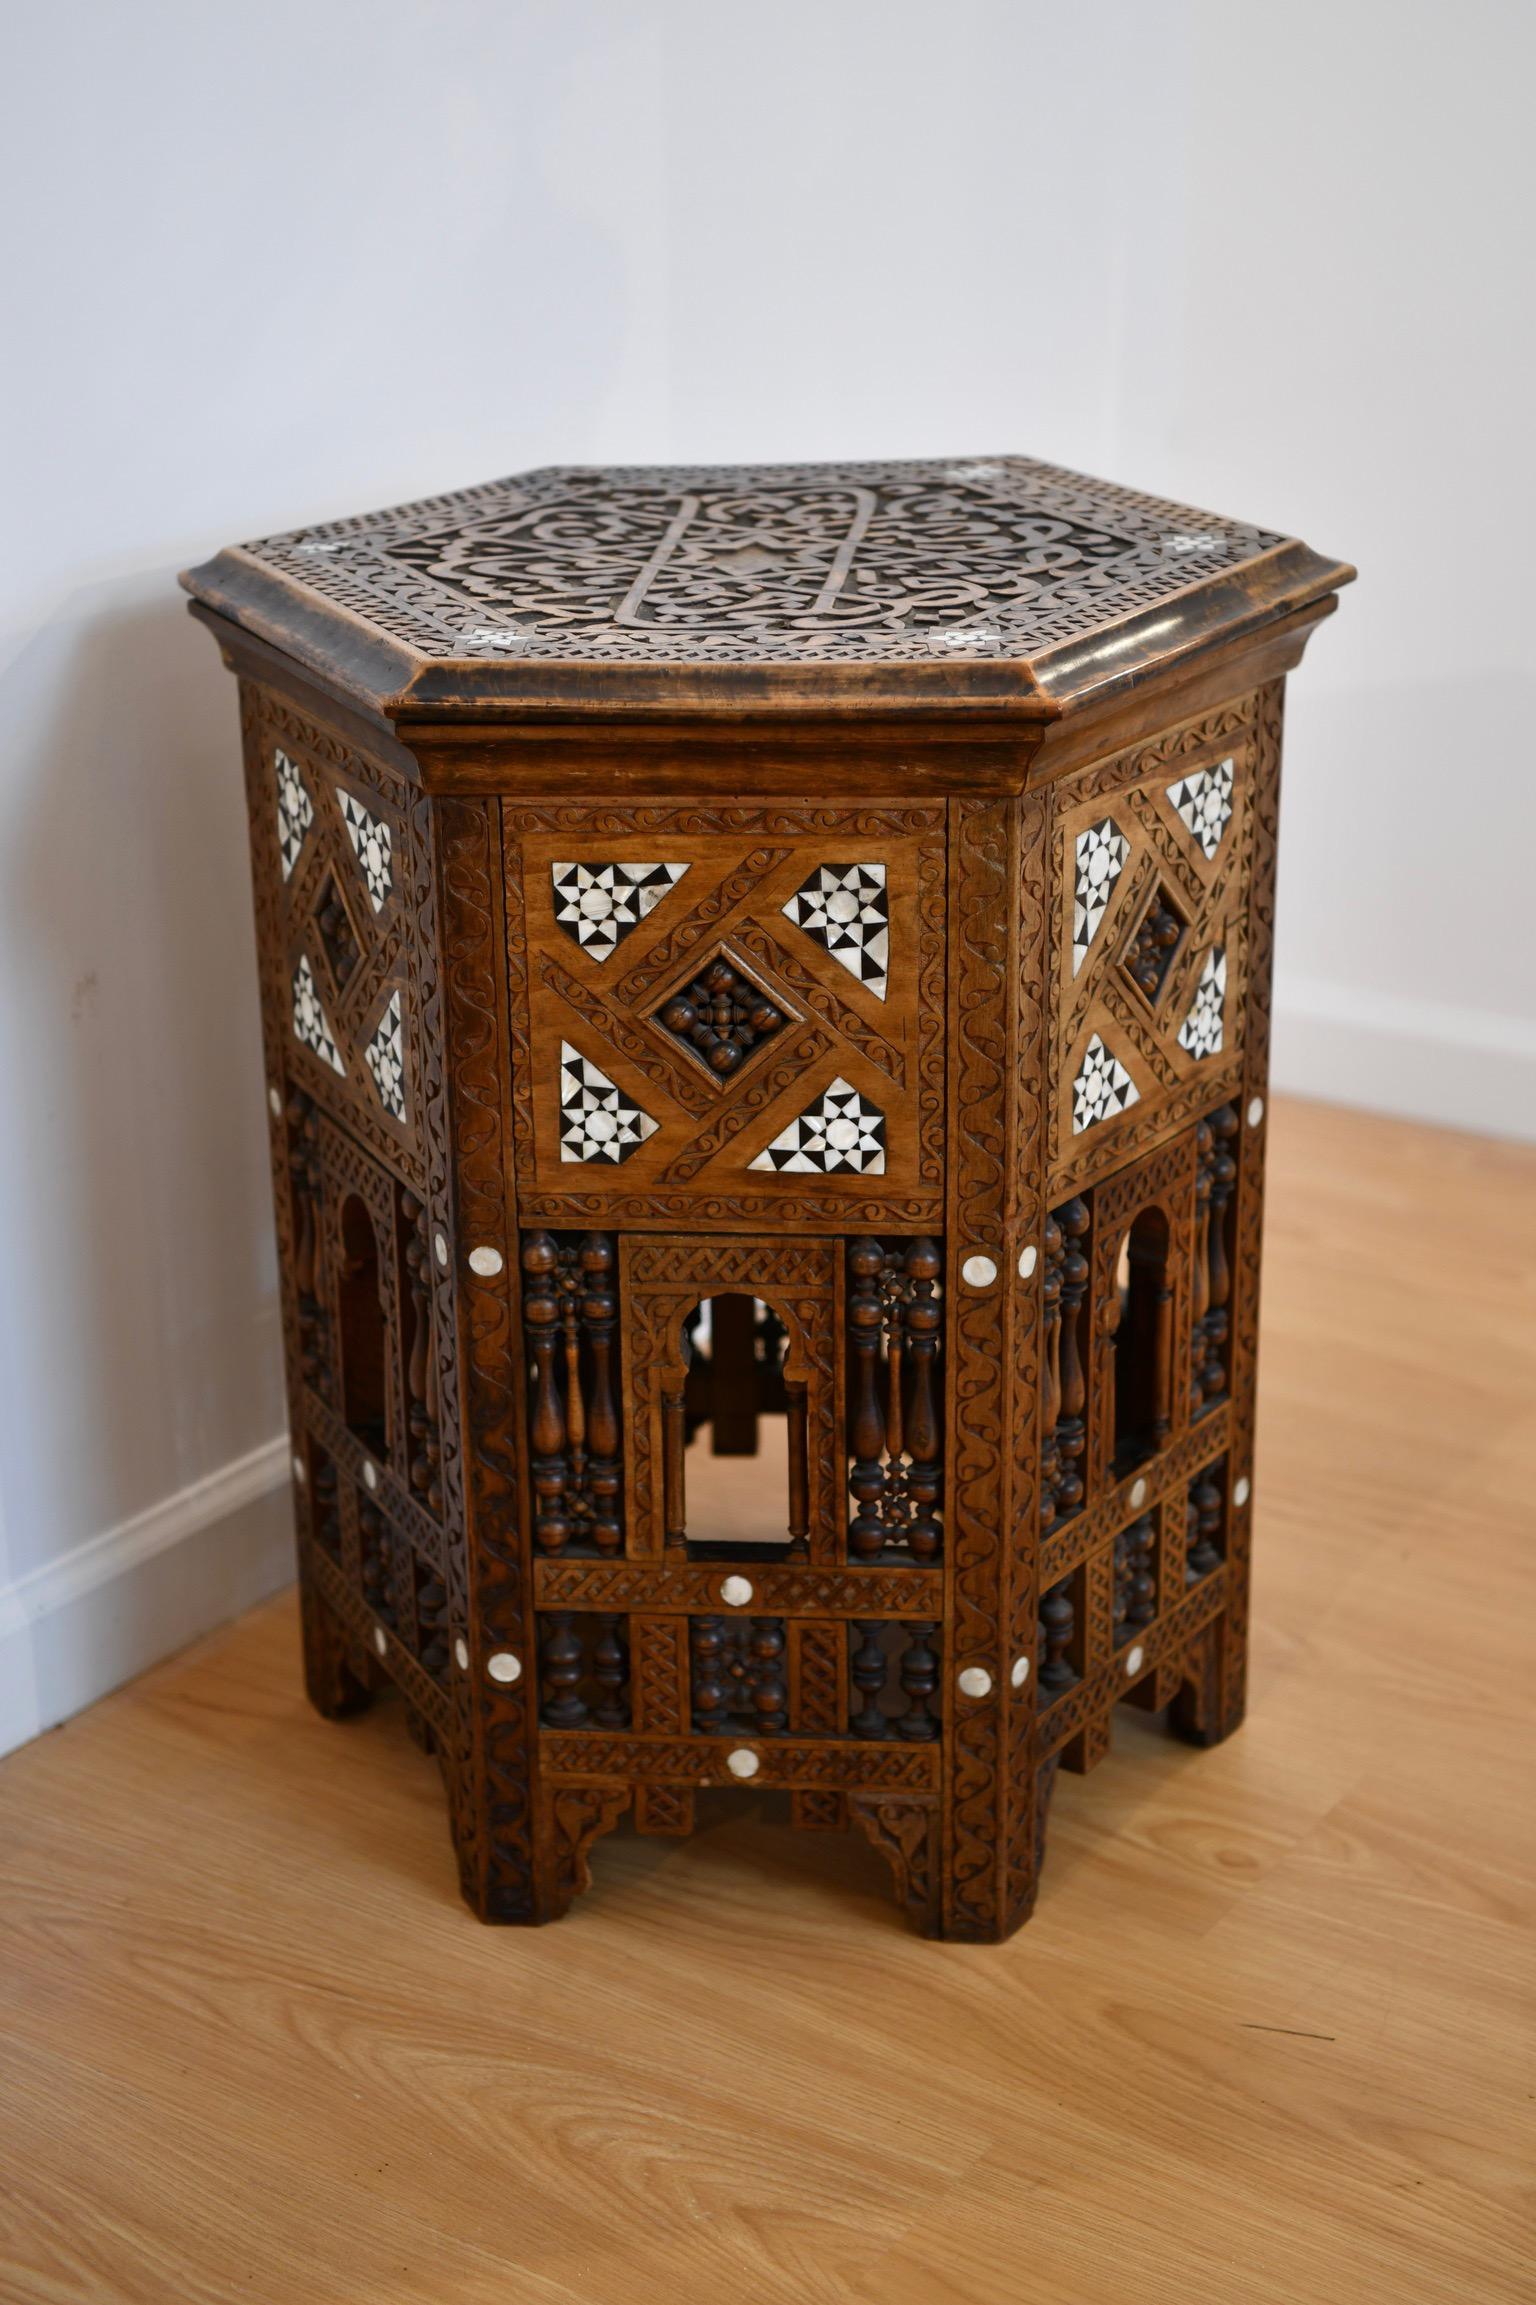 Profusely carved hexagon form Syrian table with mother of pearl inlay throughout and carved Arabic calligraphy to top. Tabouret opens to reveal storage compartment. In overall very good condition.Dimensions: 24.5